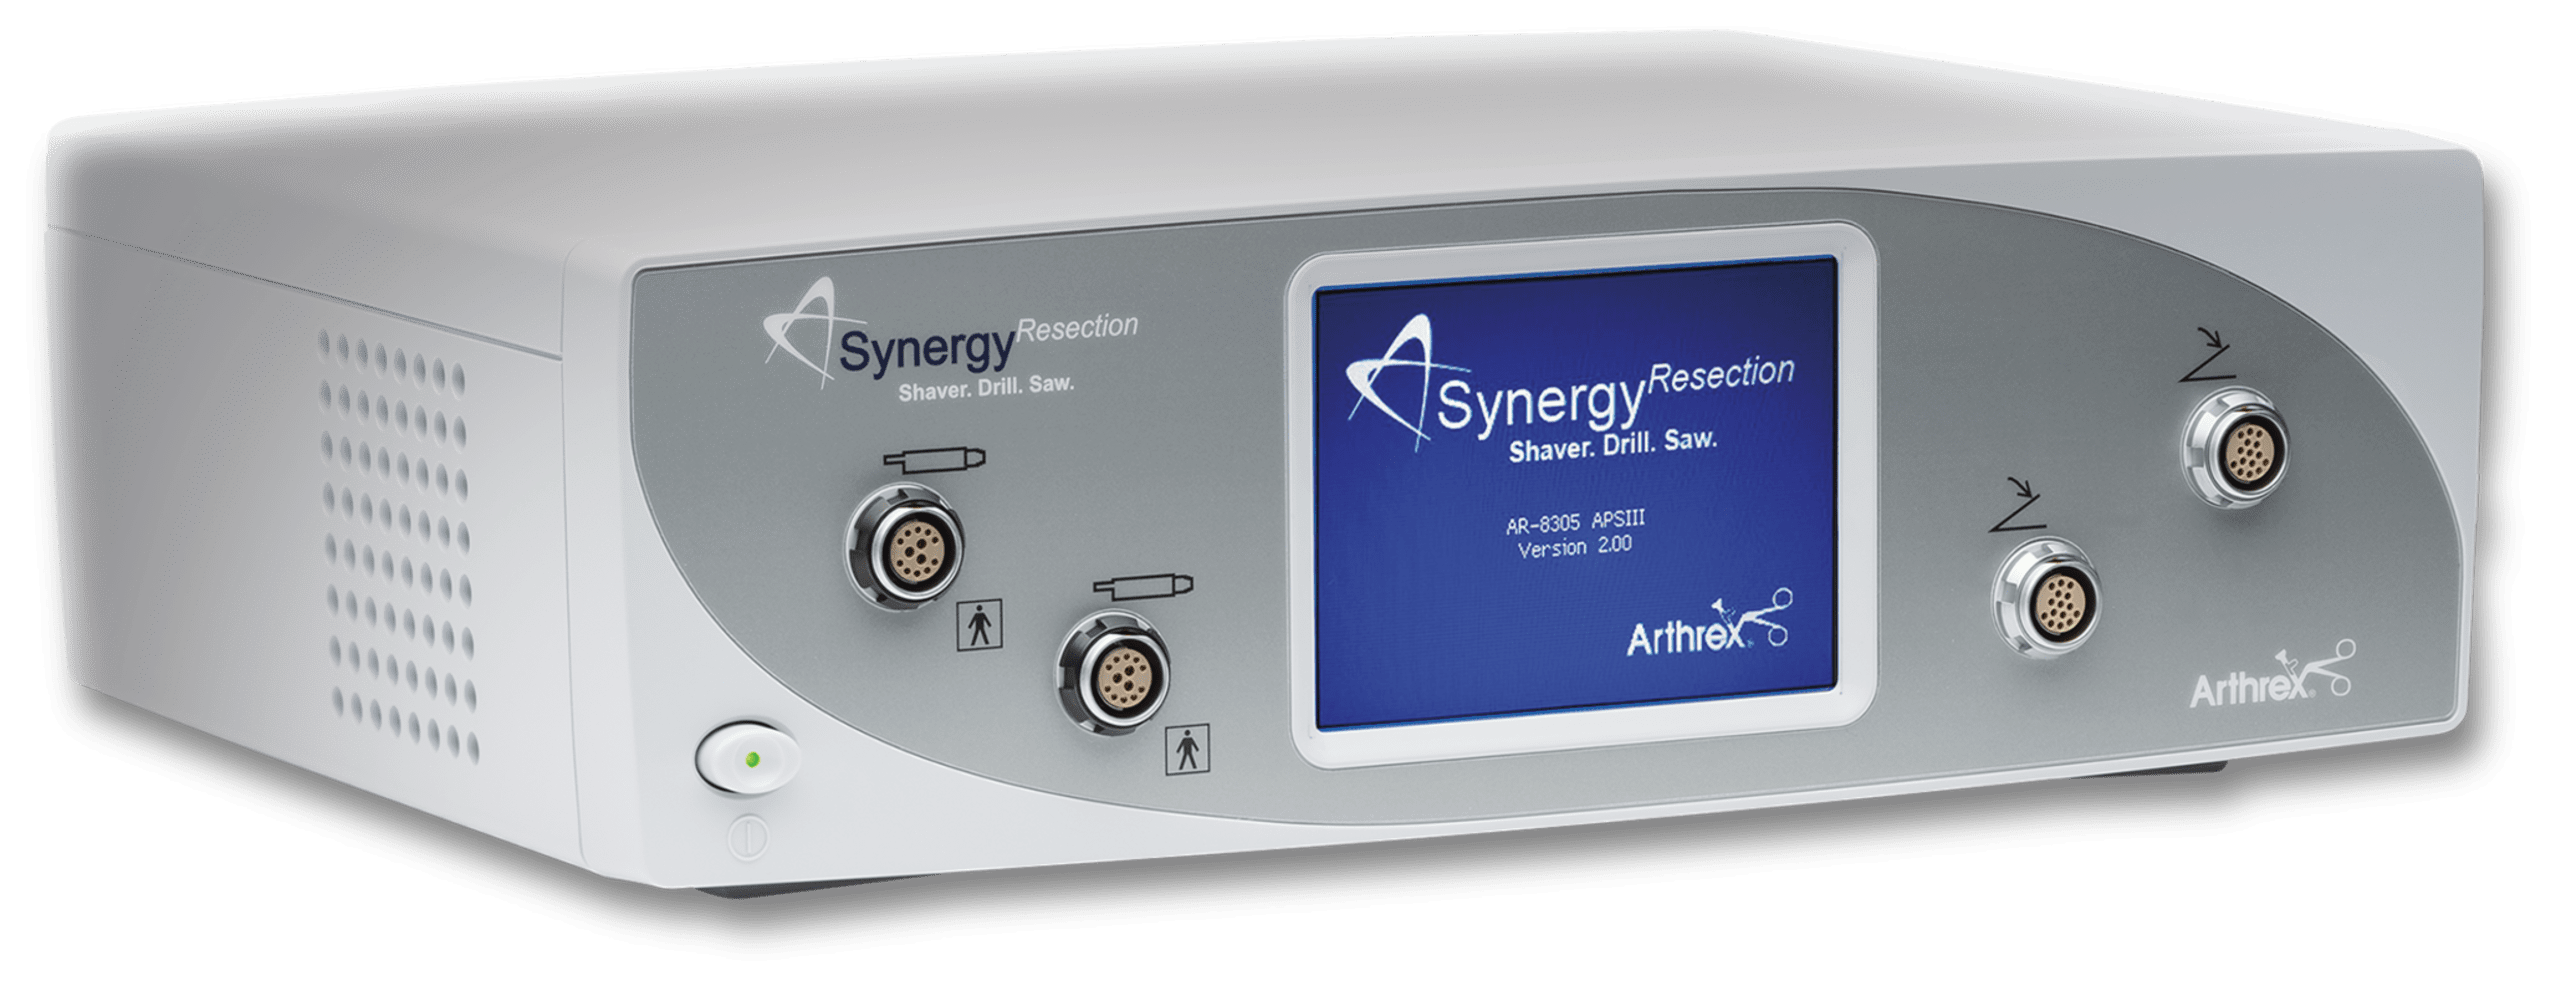 Synergy Resection Shaver Console